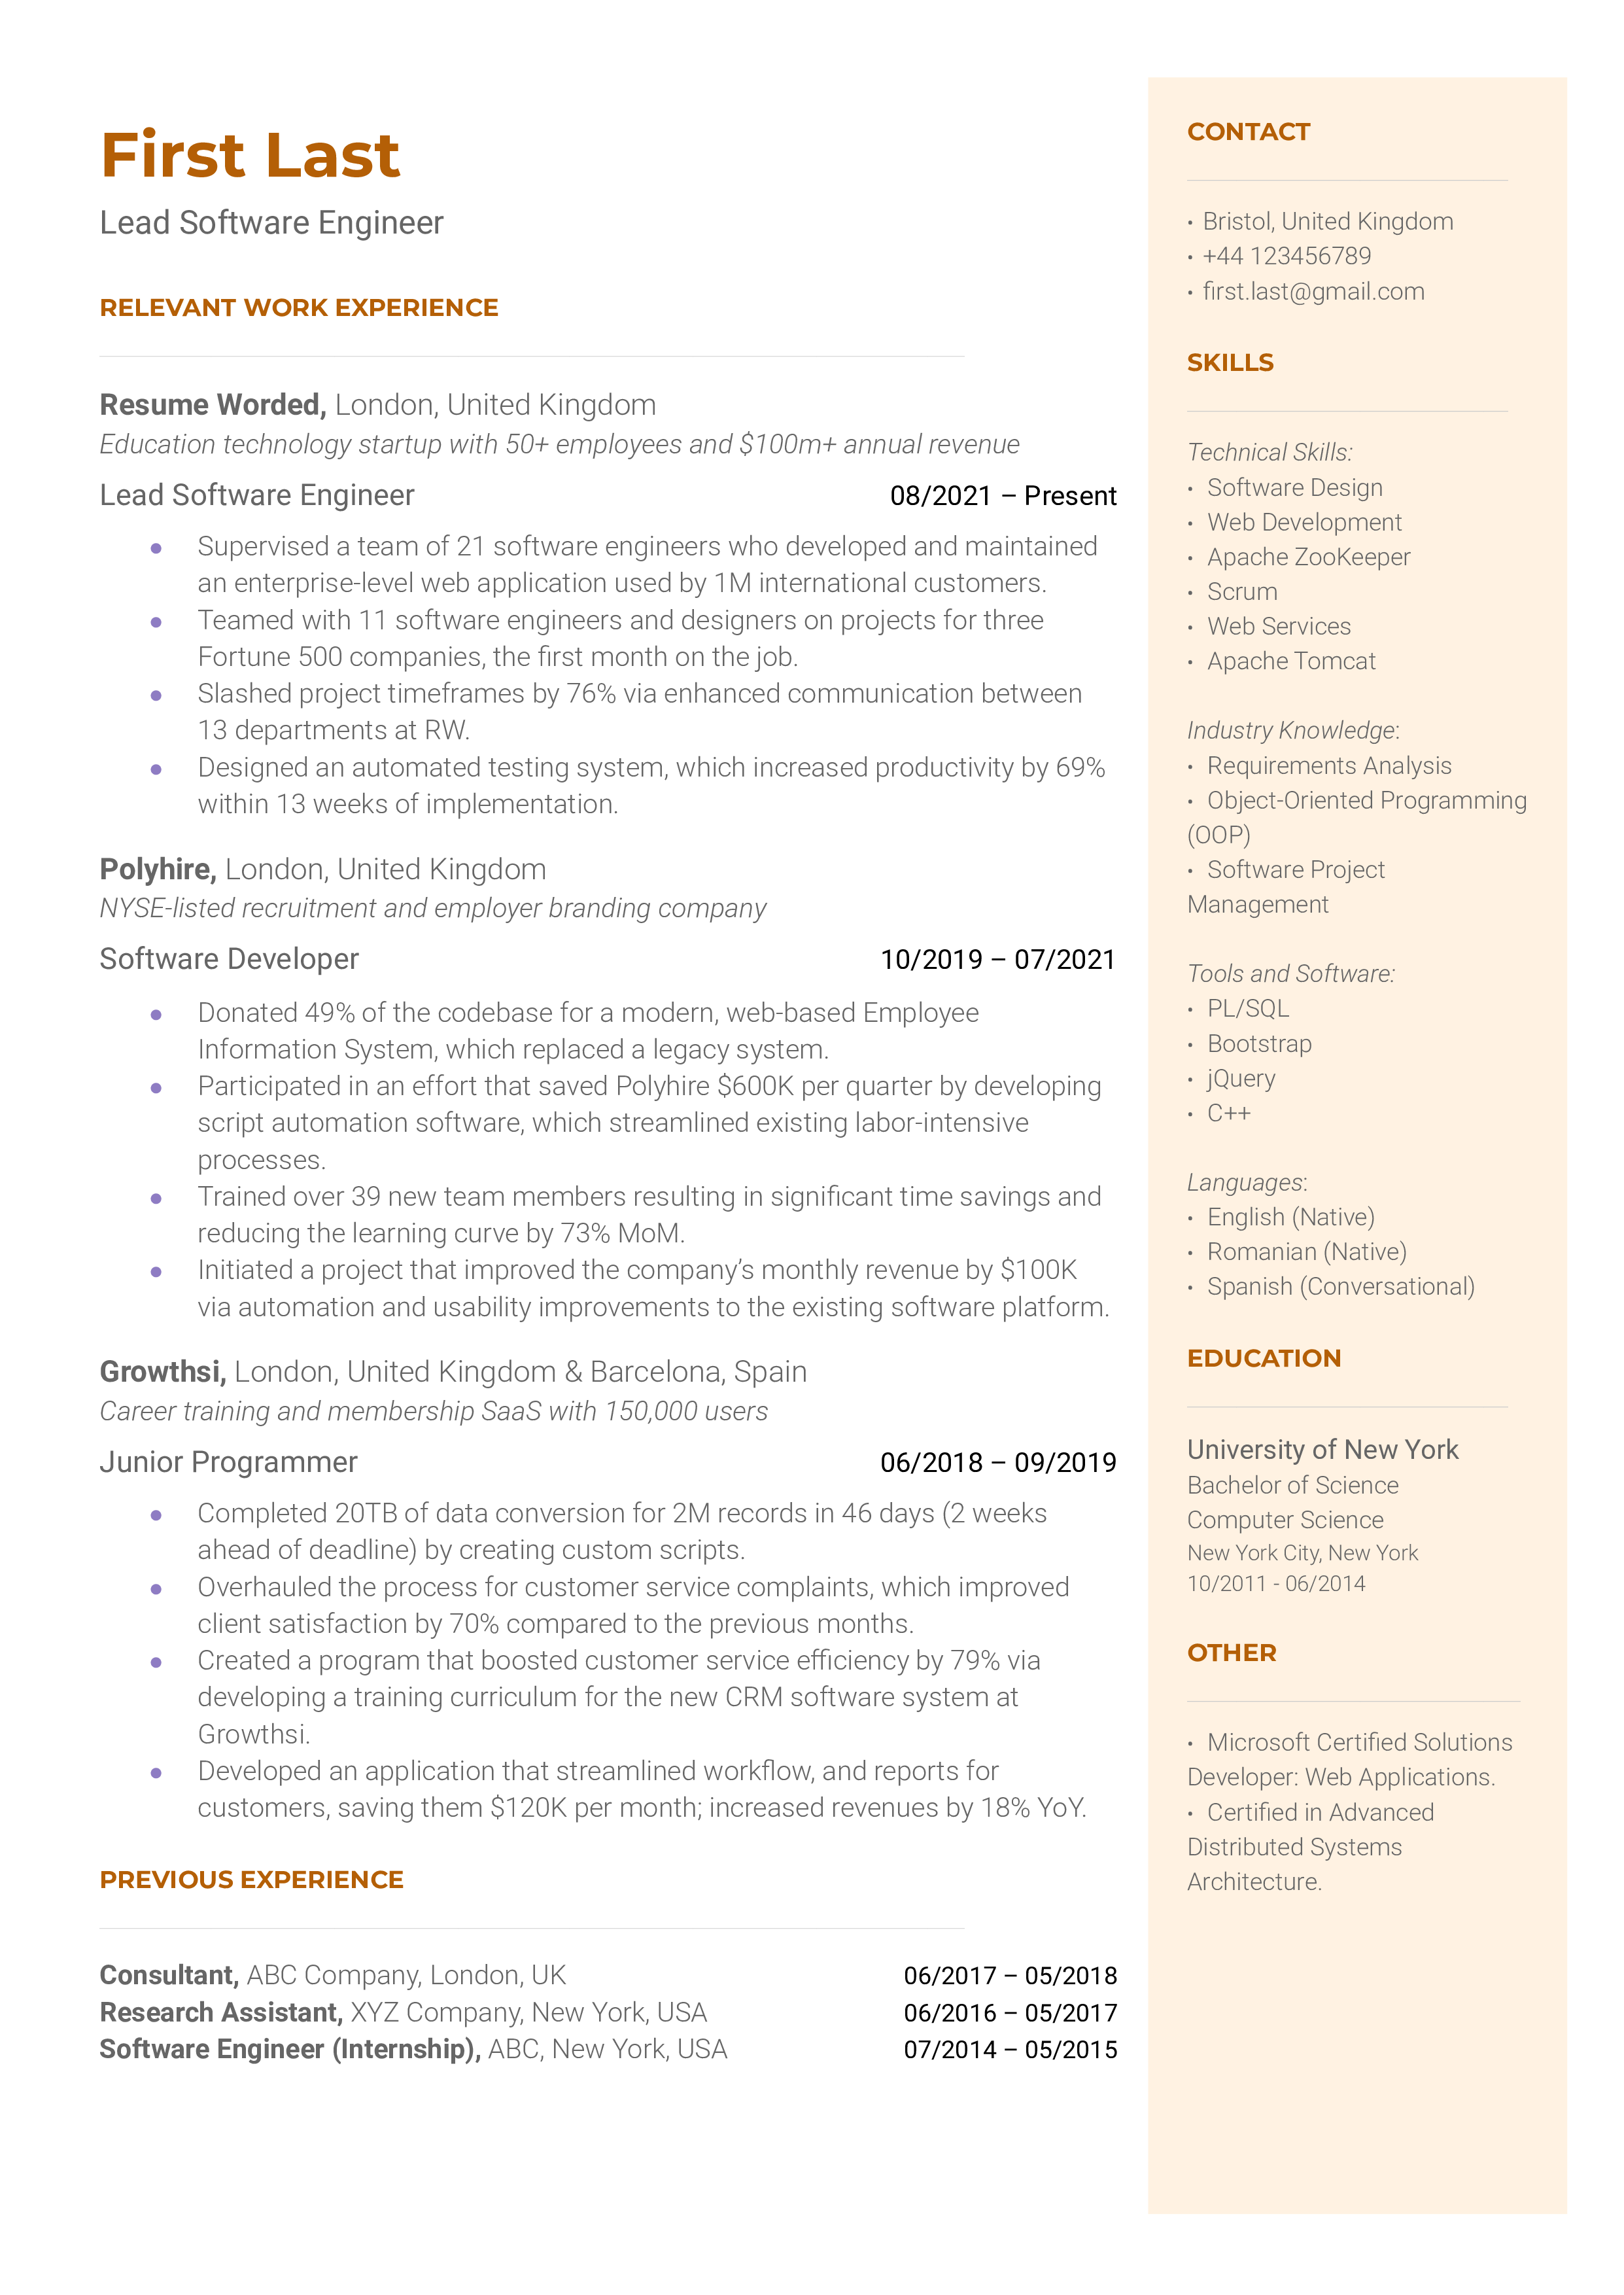 A lead software engineer resume sample that highlights the applicant’s leadership experience and software keywords.